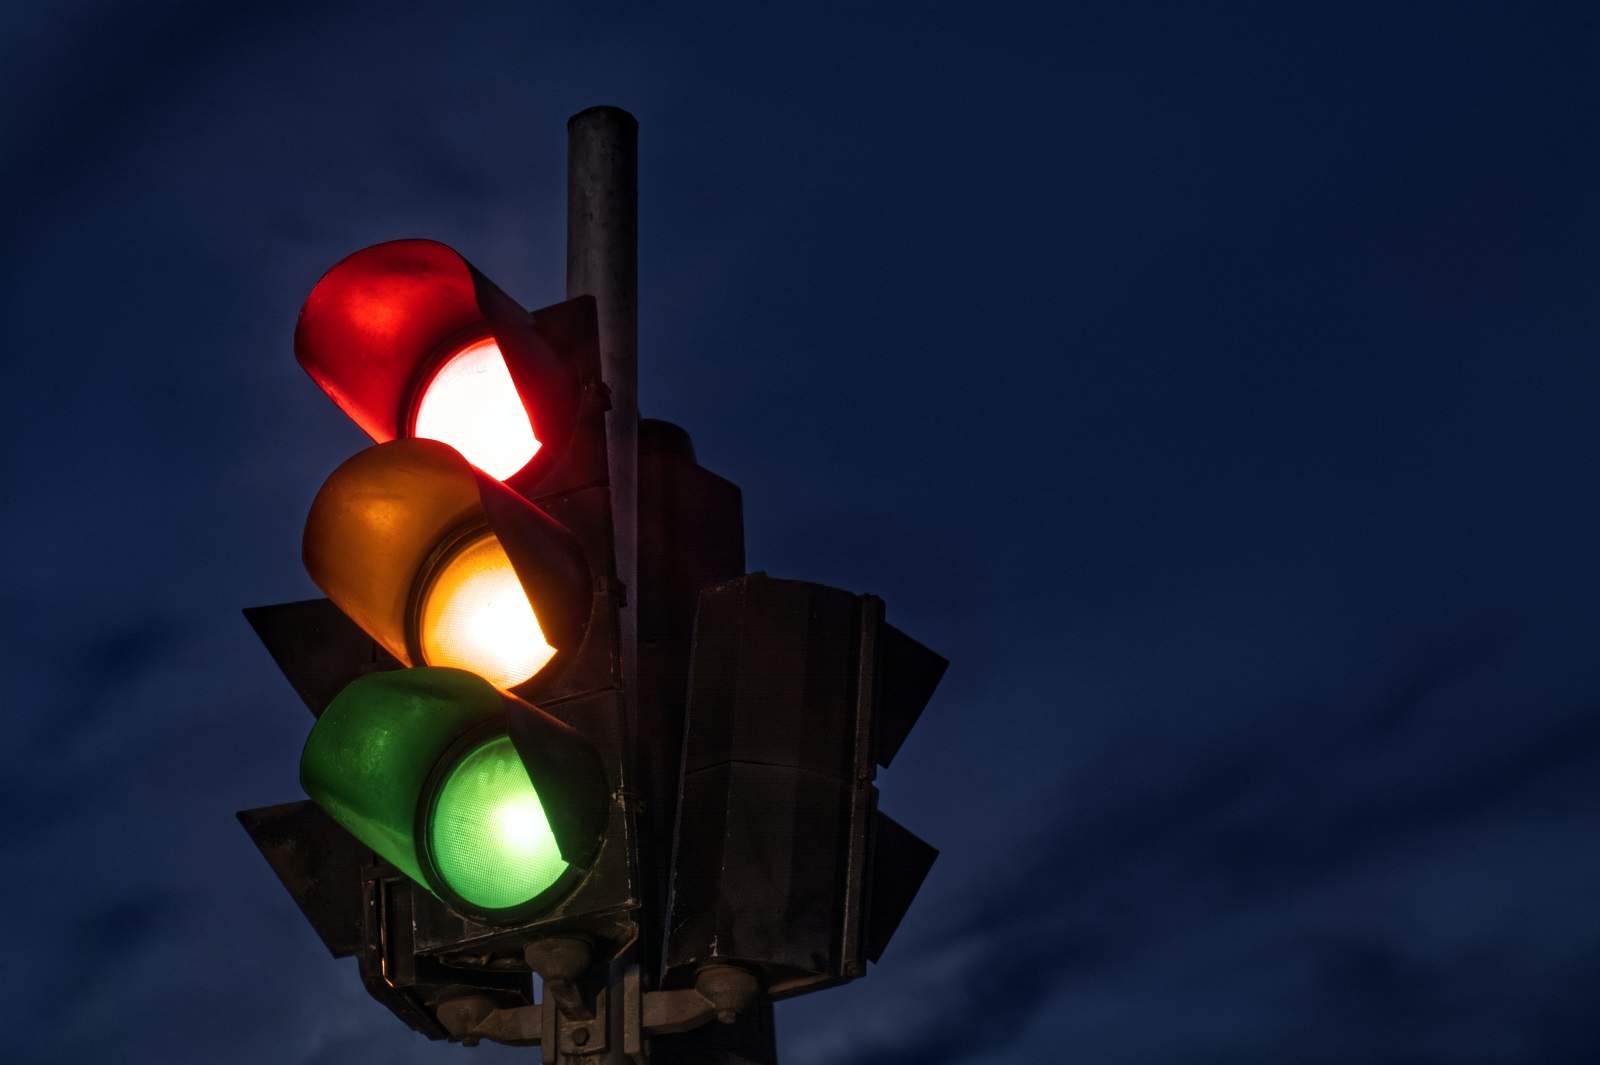 The constituent parties of Germany’s traffic light coalition may struggle to follow Angela Merkel’s moderate, conciliatory crisis-manager format (Tsvetoslav Hristov/Unsplash)